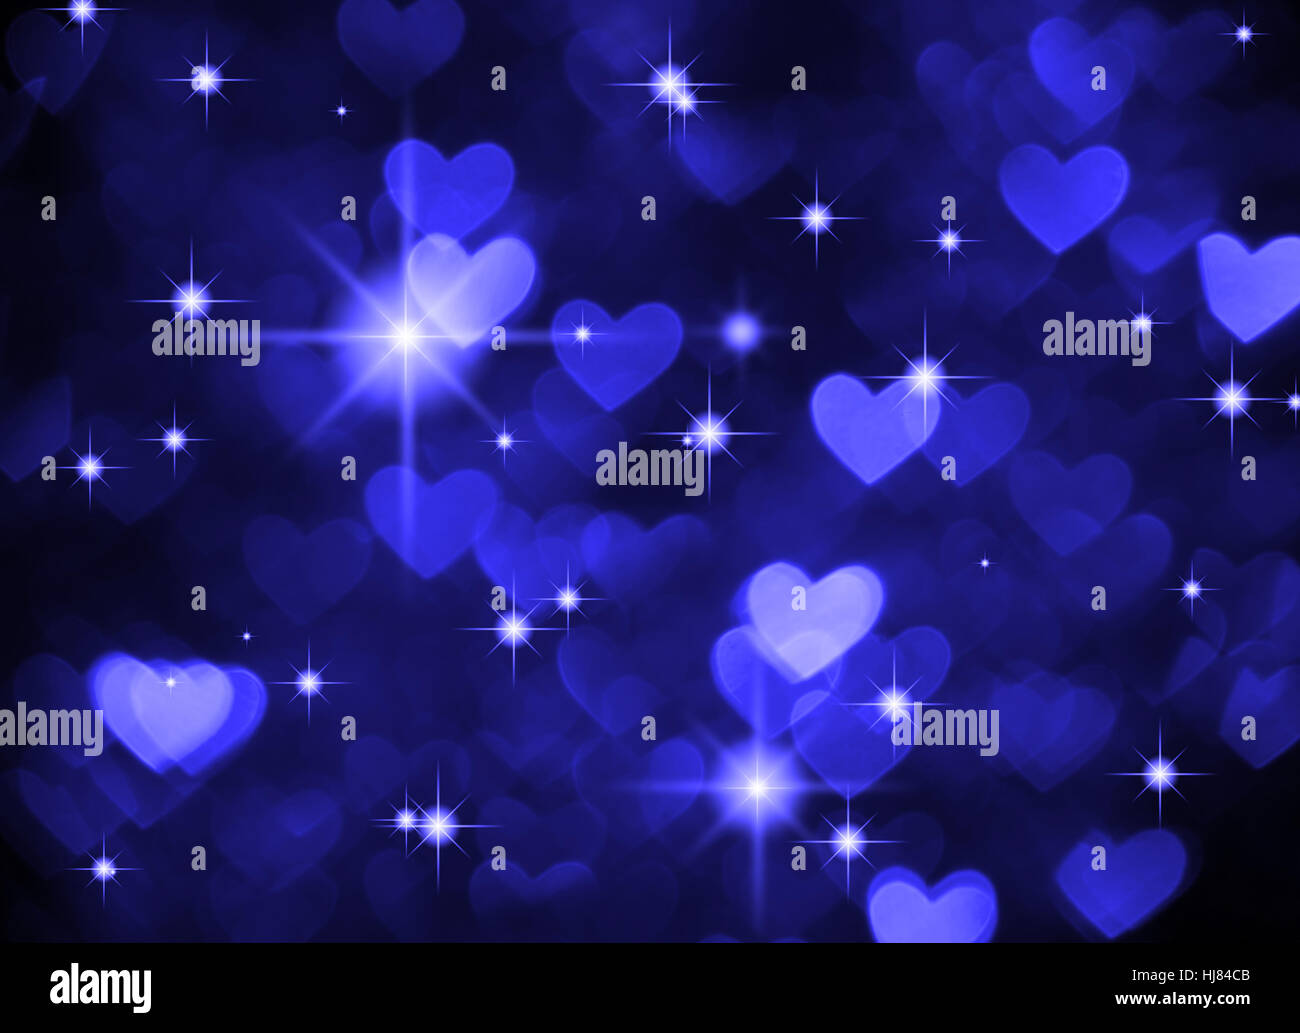 Heart background boke photo, dark blue color. Abstract holiday, celebration and valentine backdrop. Stock Photo